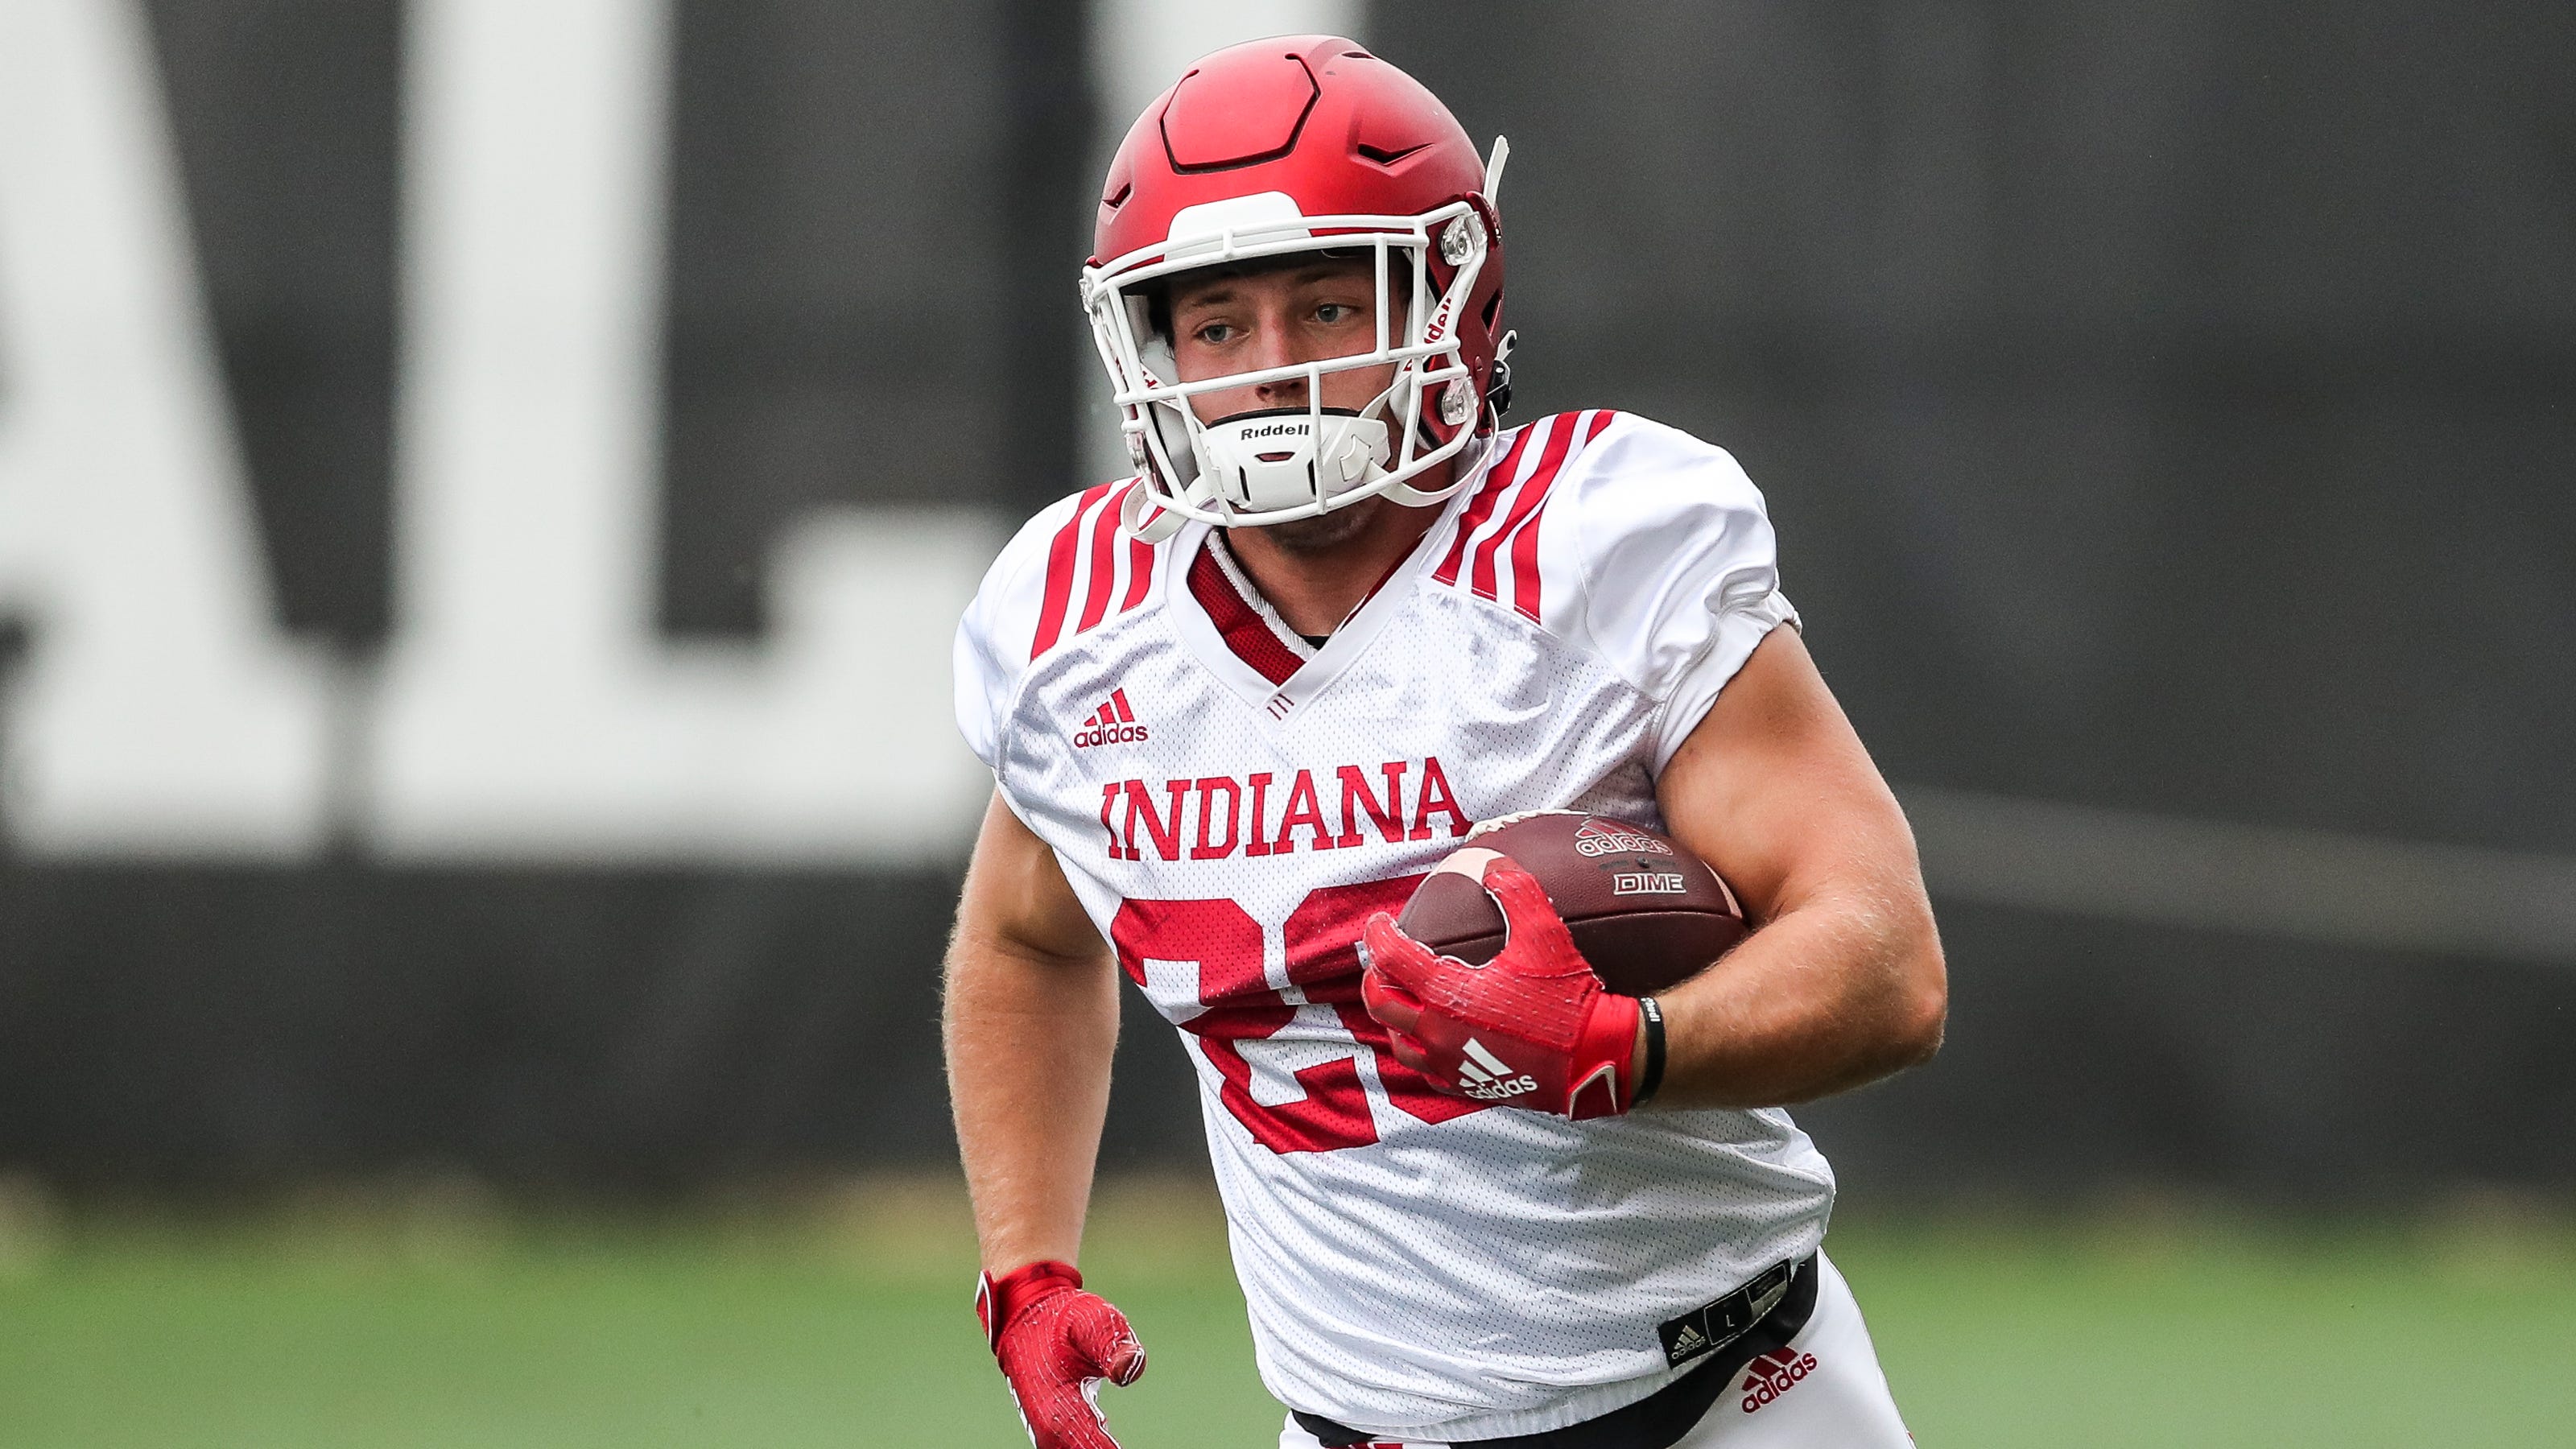 Indiana football 2019 Mr. Football Charlie Spegal hopes to impress as